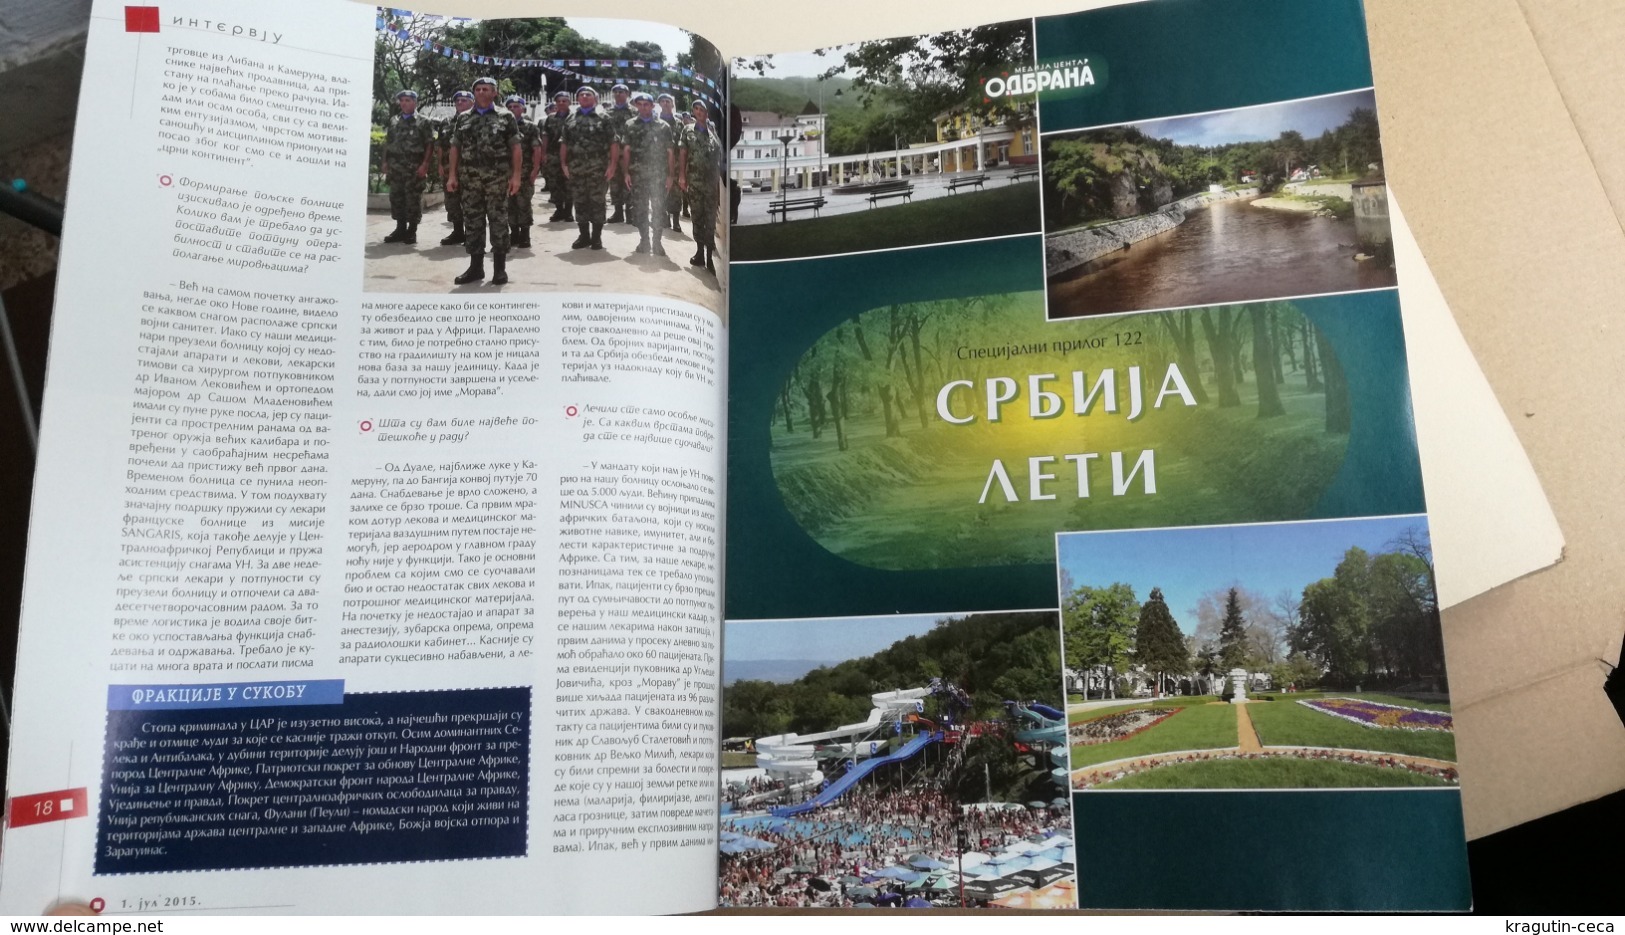 2015 SERBIA ARMY MAGAZINE NEWSPAPERS NEWS TERRORISM ISIL BALKAN AIR SOLUTIONS EUROPE MILITARY TRAINING AIRCRAFT